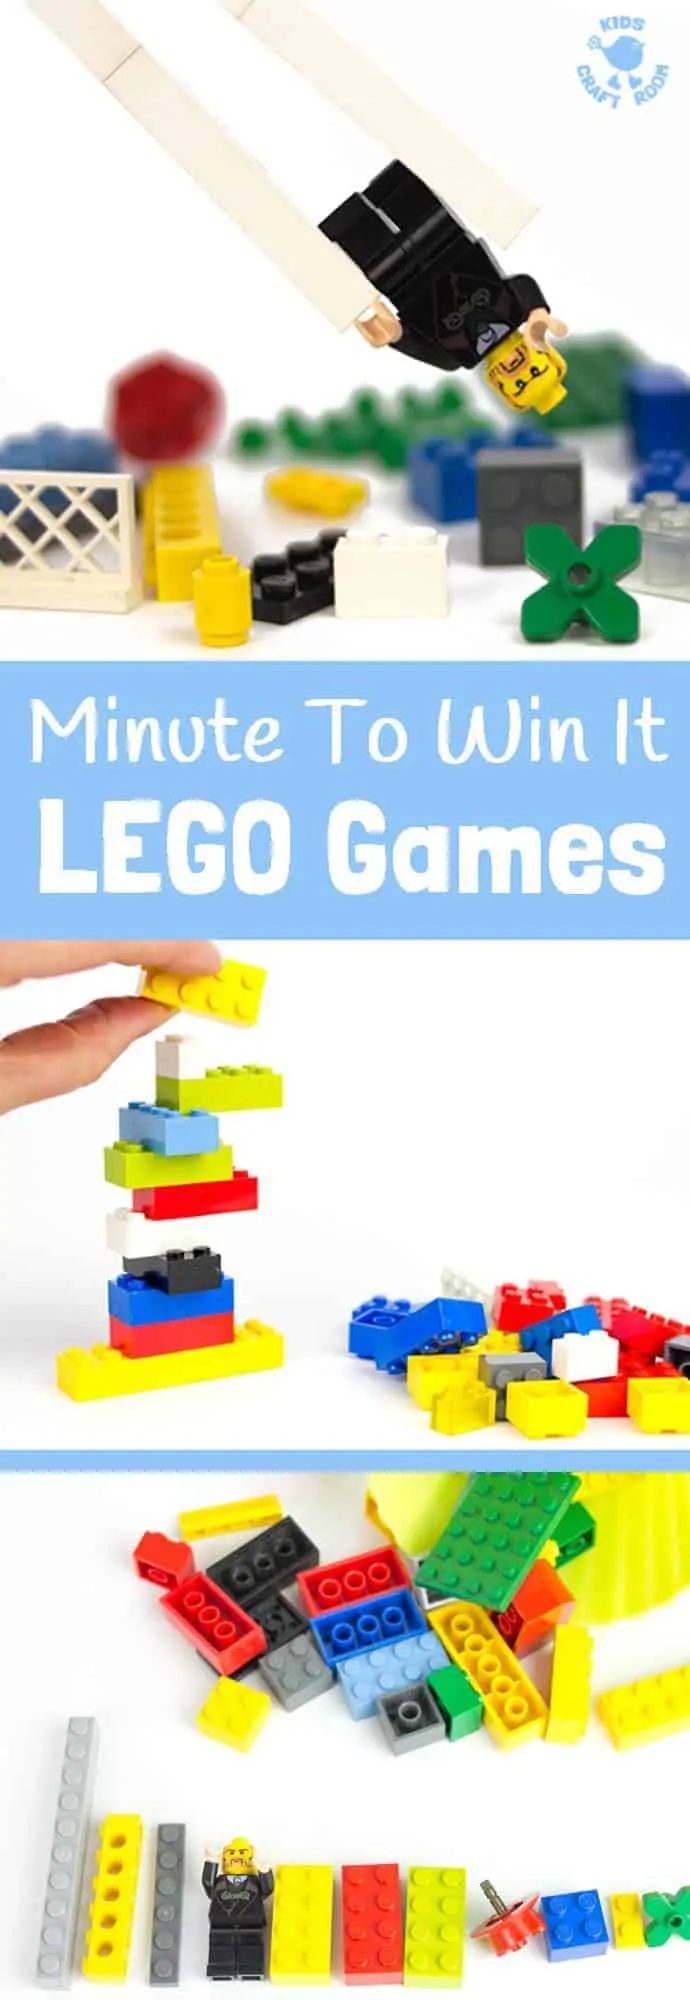 Exciting Minute To Win It Games with LEGO© are fun for all ages making them great for family games nights, kids play dates, Christmas, birthdays and New Year's Eve. Challenge your friends and family with these fun game ideas. A family activity everyone with enjoy. #MinuteToWinIt #MinuteToWinItGames #Games #GamesIdeas #FamilyGames #GamesNight #FamilyGamesNight #KidsGames #KidsActivities #Lego #LegoIdeas #LegoGames #NewYear'sEve #NewYear'sEveIdeas #Party #PartyGames #PartyIdeas